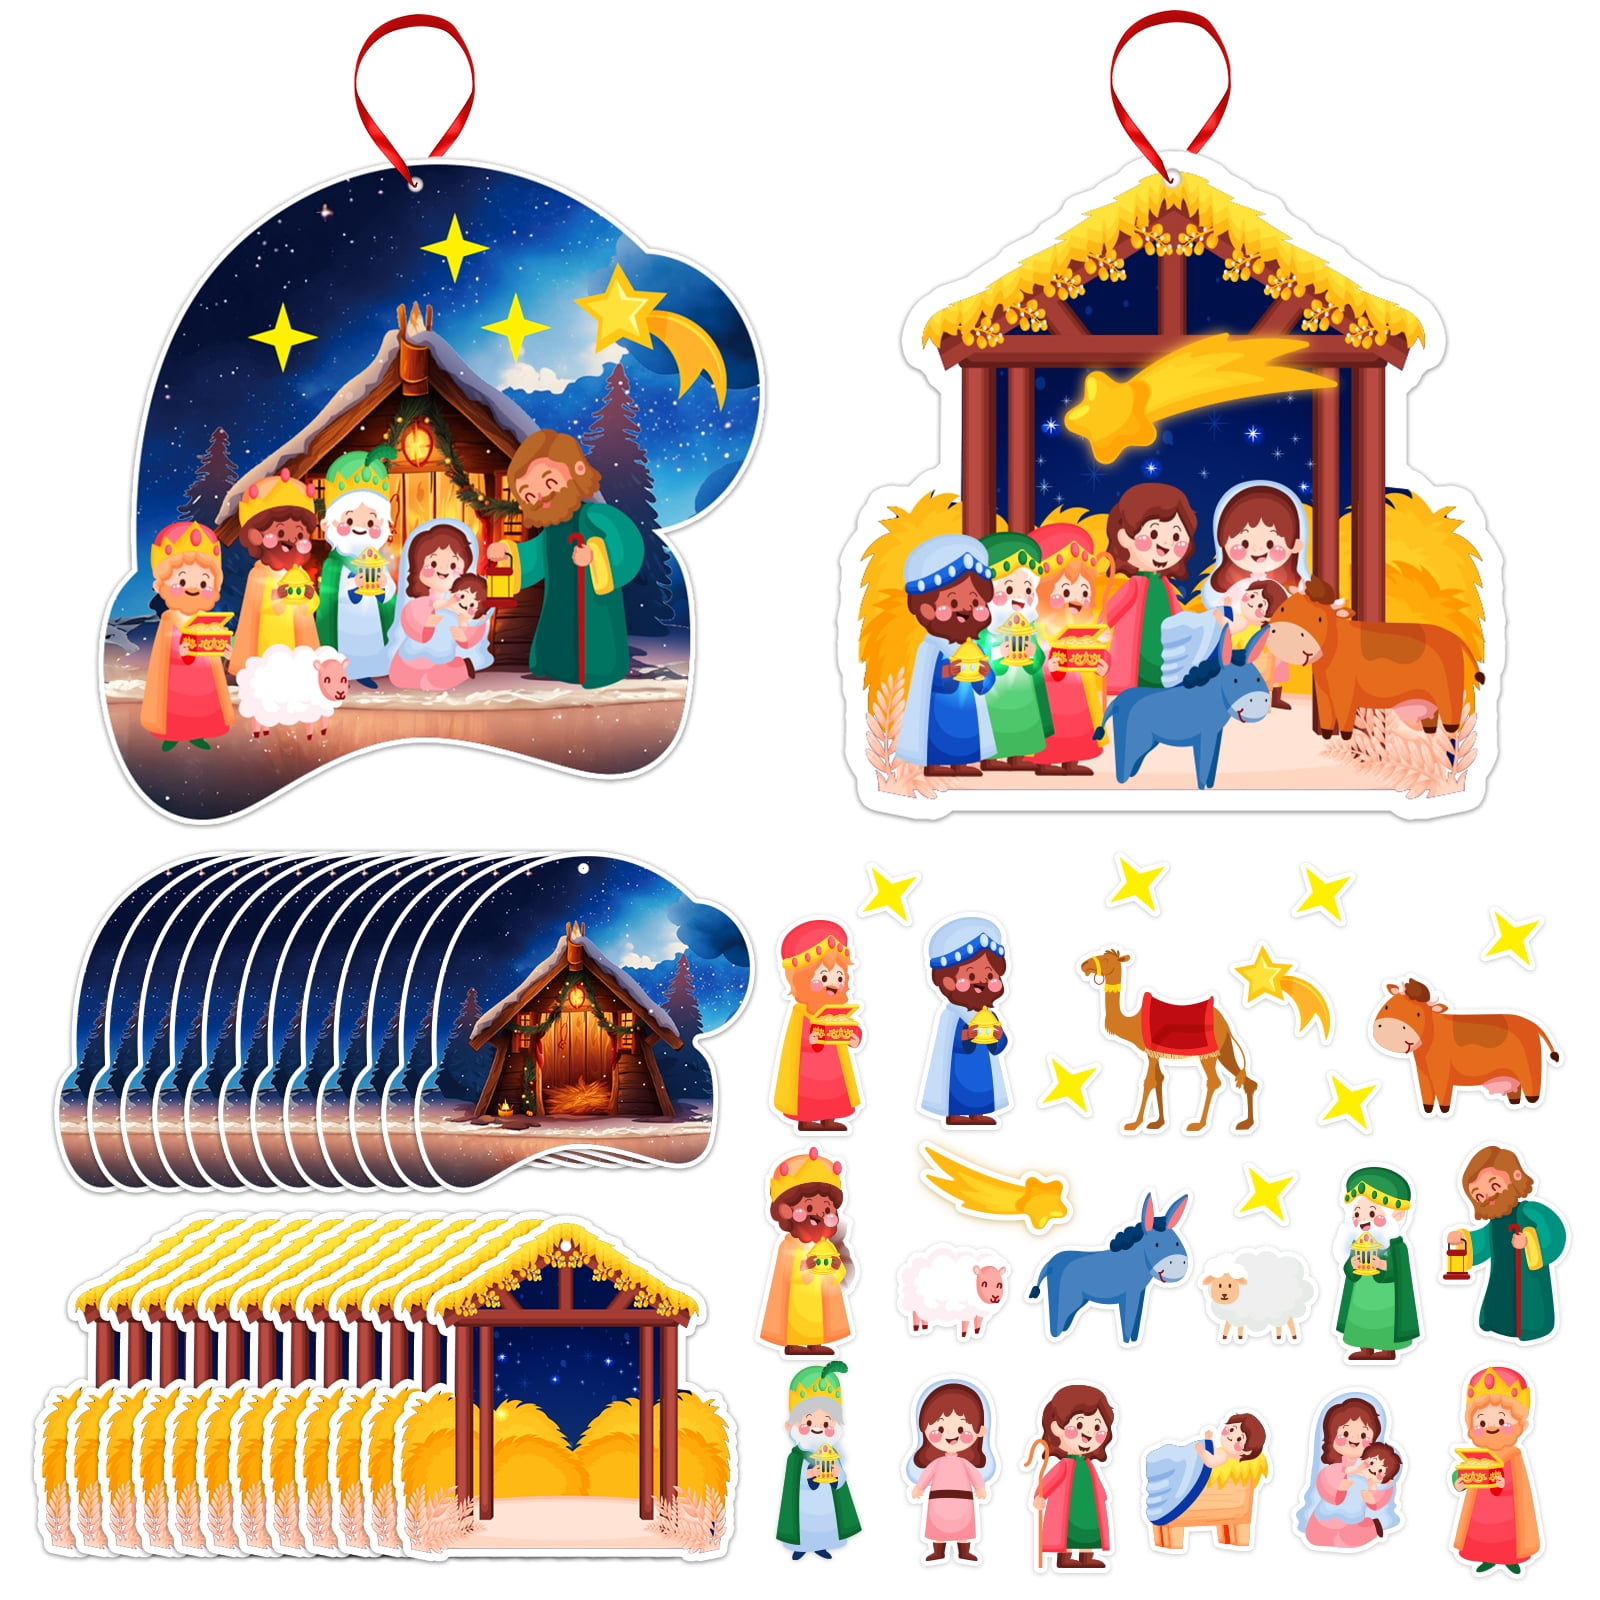 WhatSign Make a Nativity Scene Stickers Christmas Ornament Crafts for ...